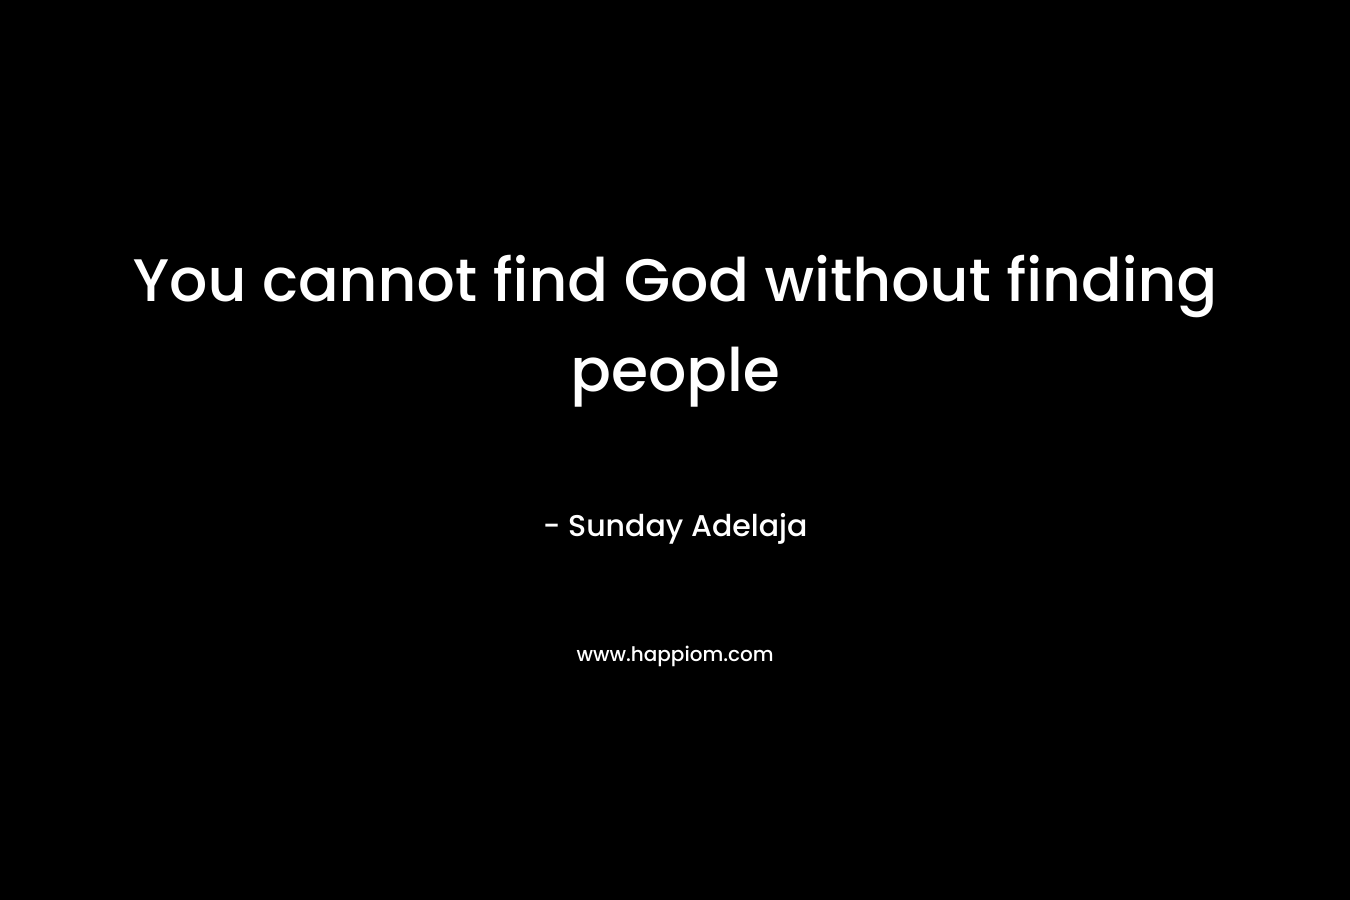 You cannot find God without finding people